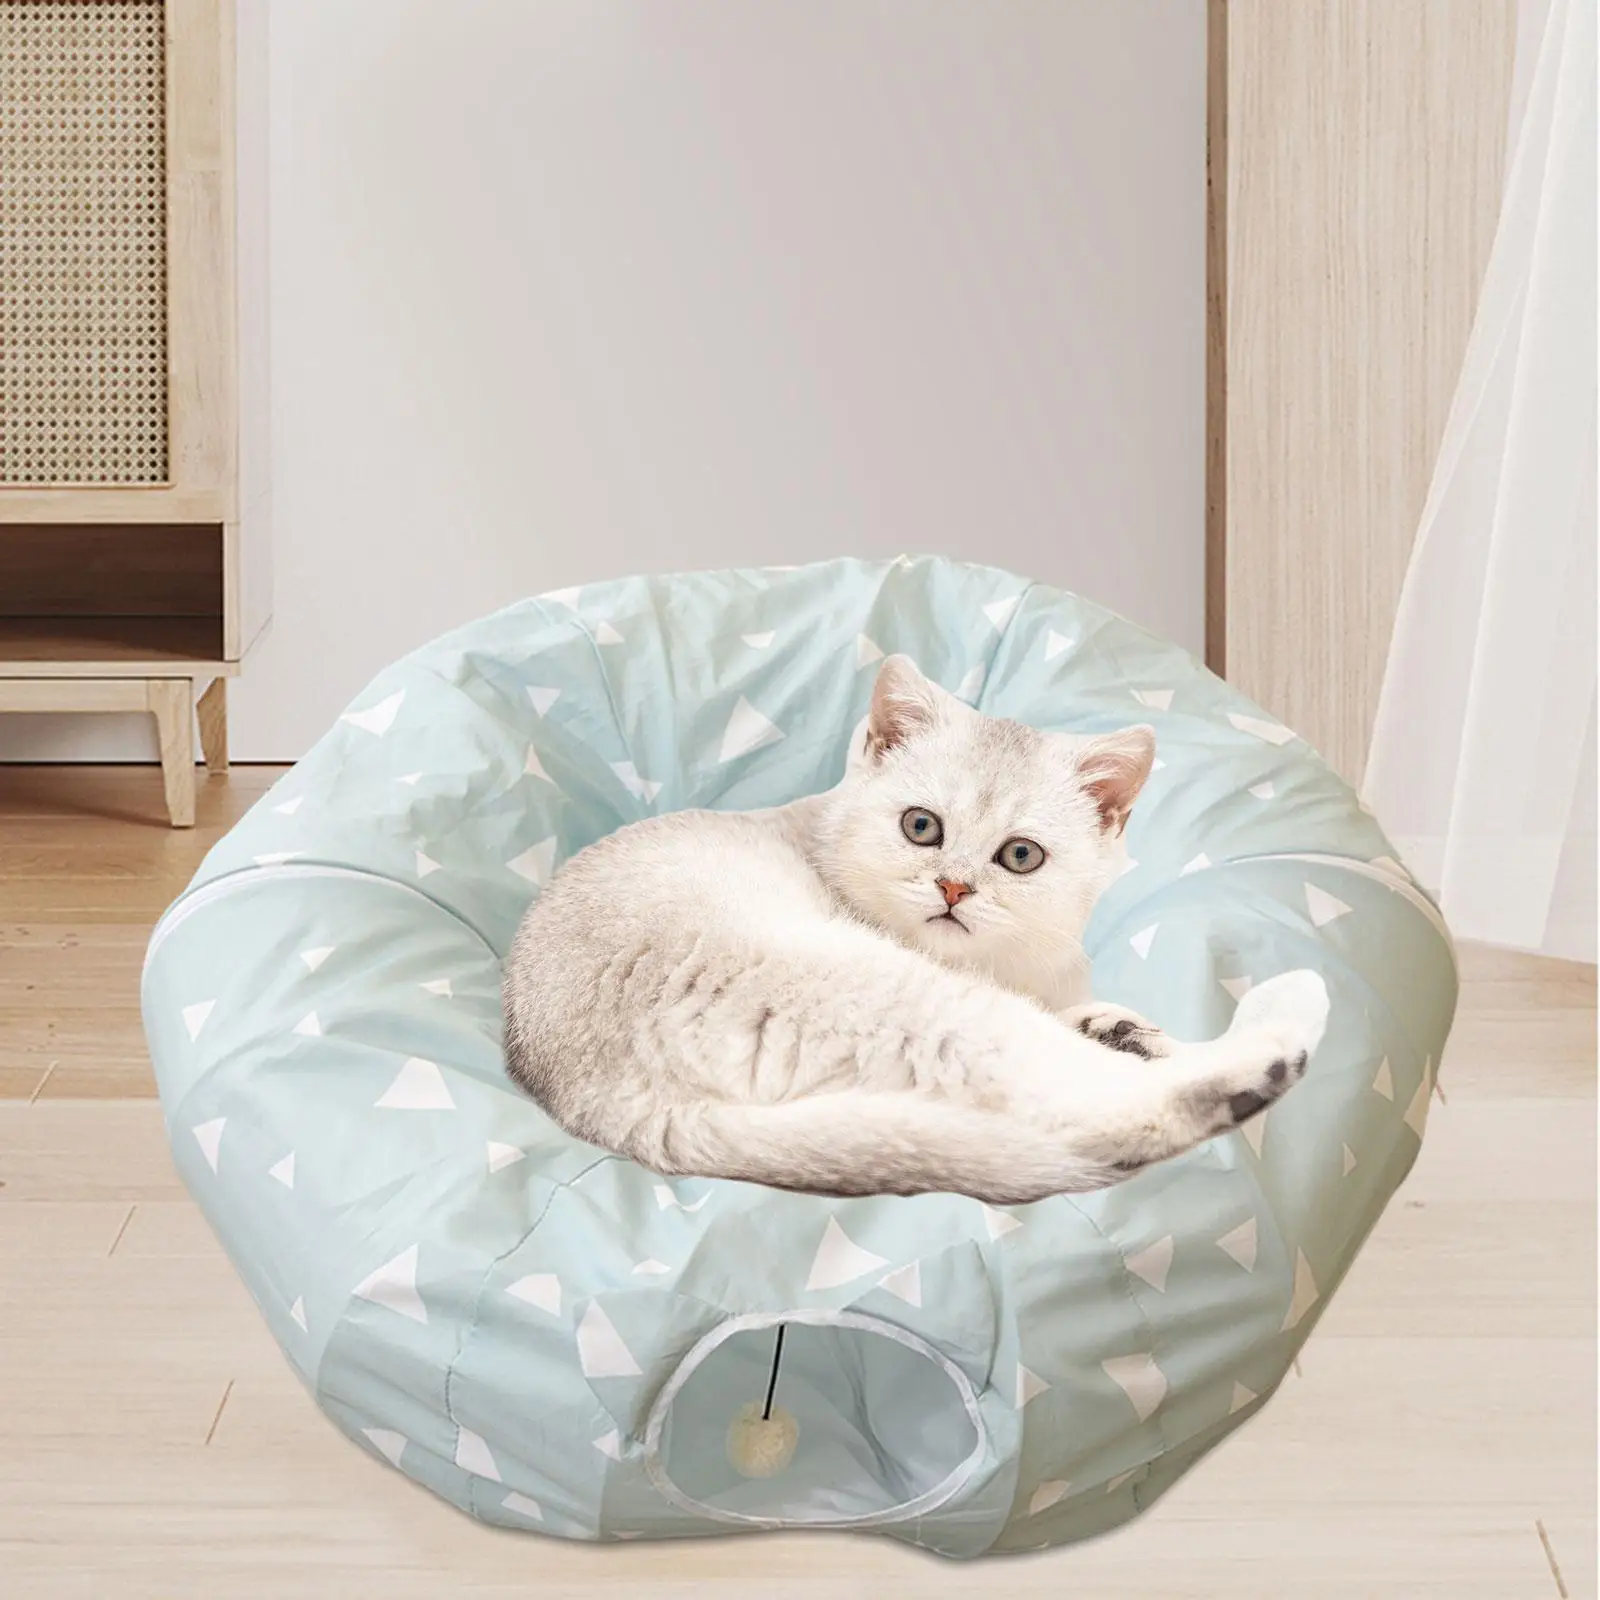 Cat Tunnel Collapsible Playing Foldable with Hanging Ball Pet Bed Cat Interactive Toy for Small Animals Bunny Indoor Cats Kitten